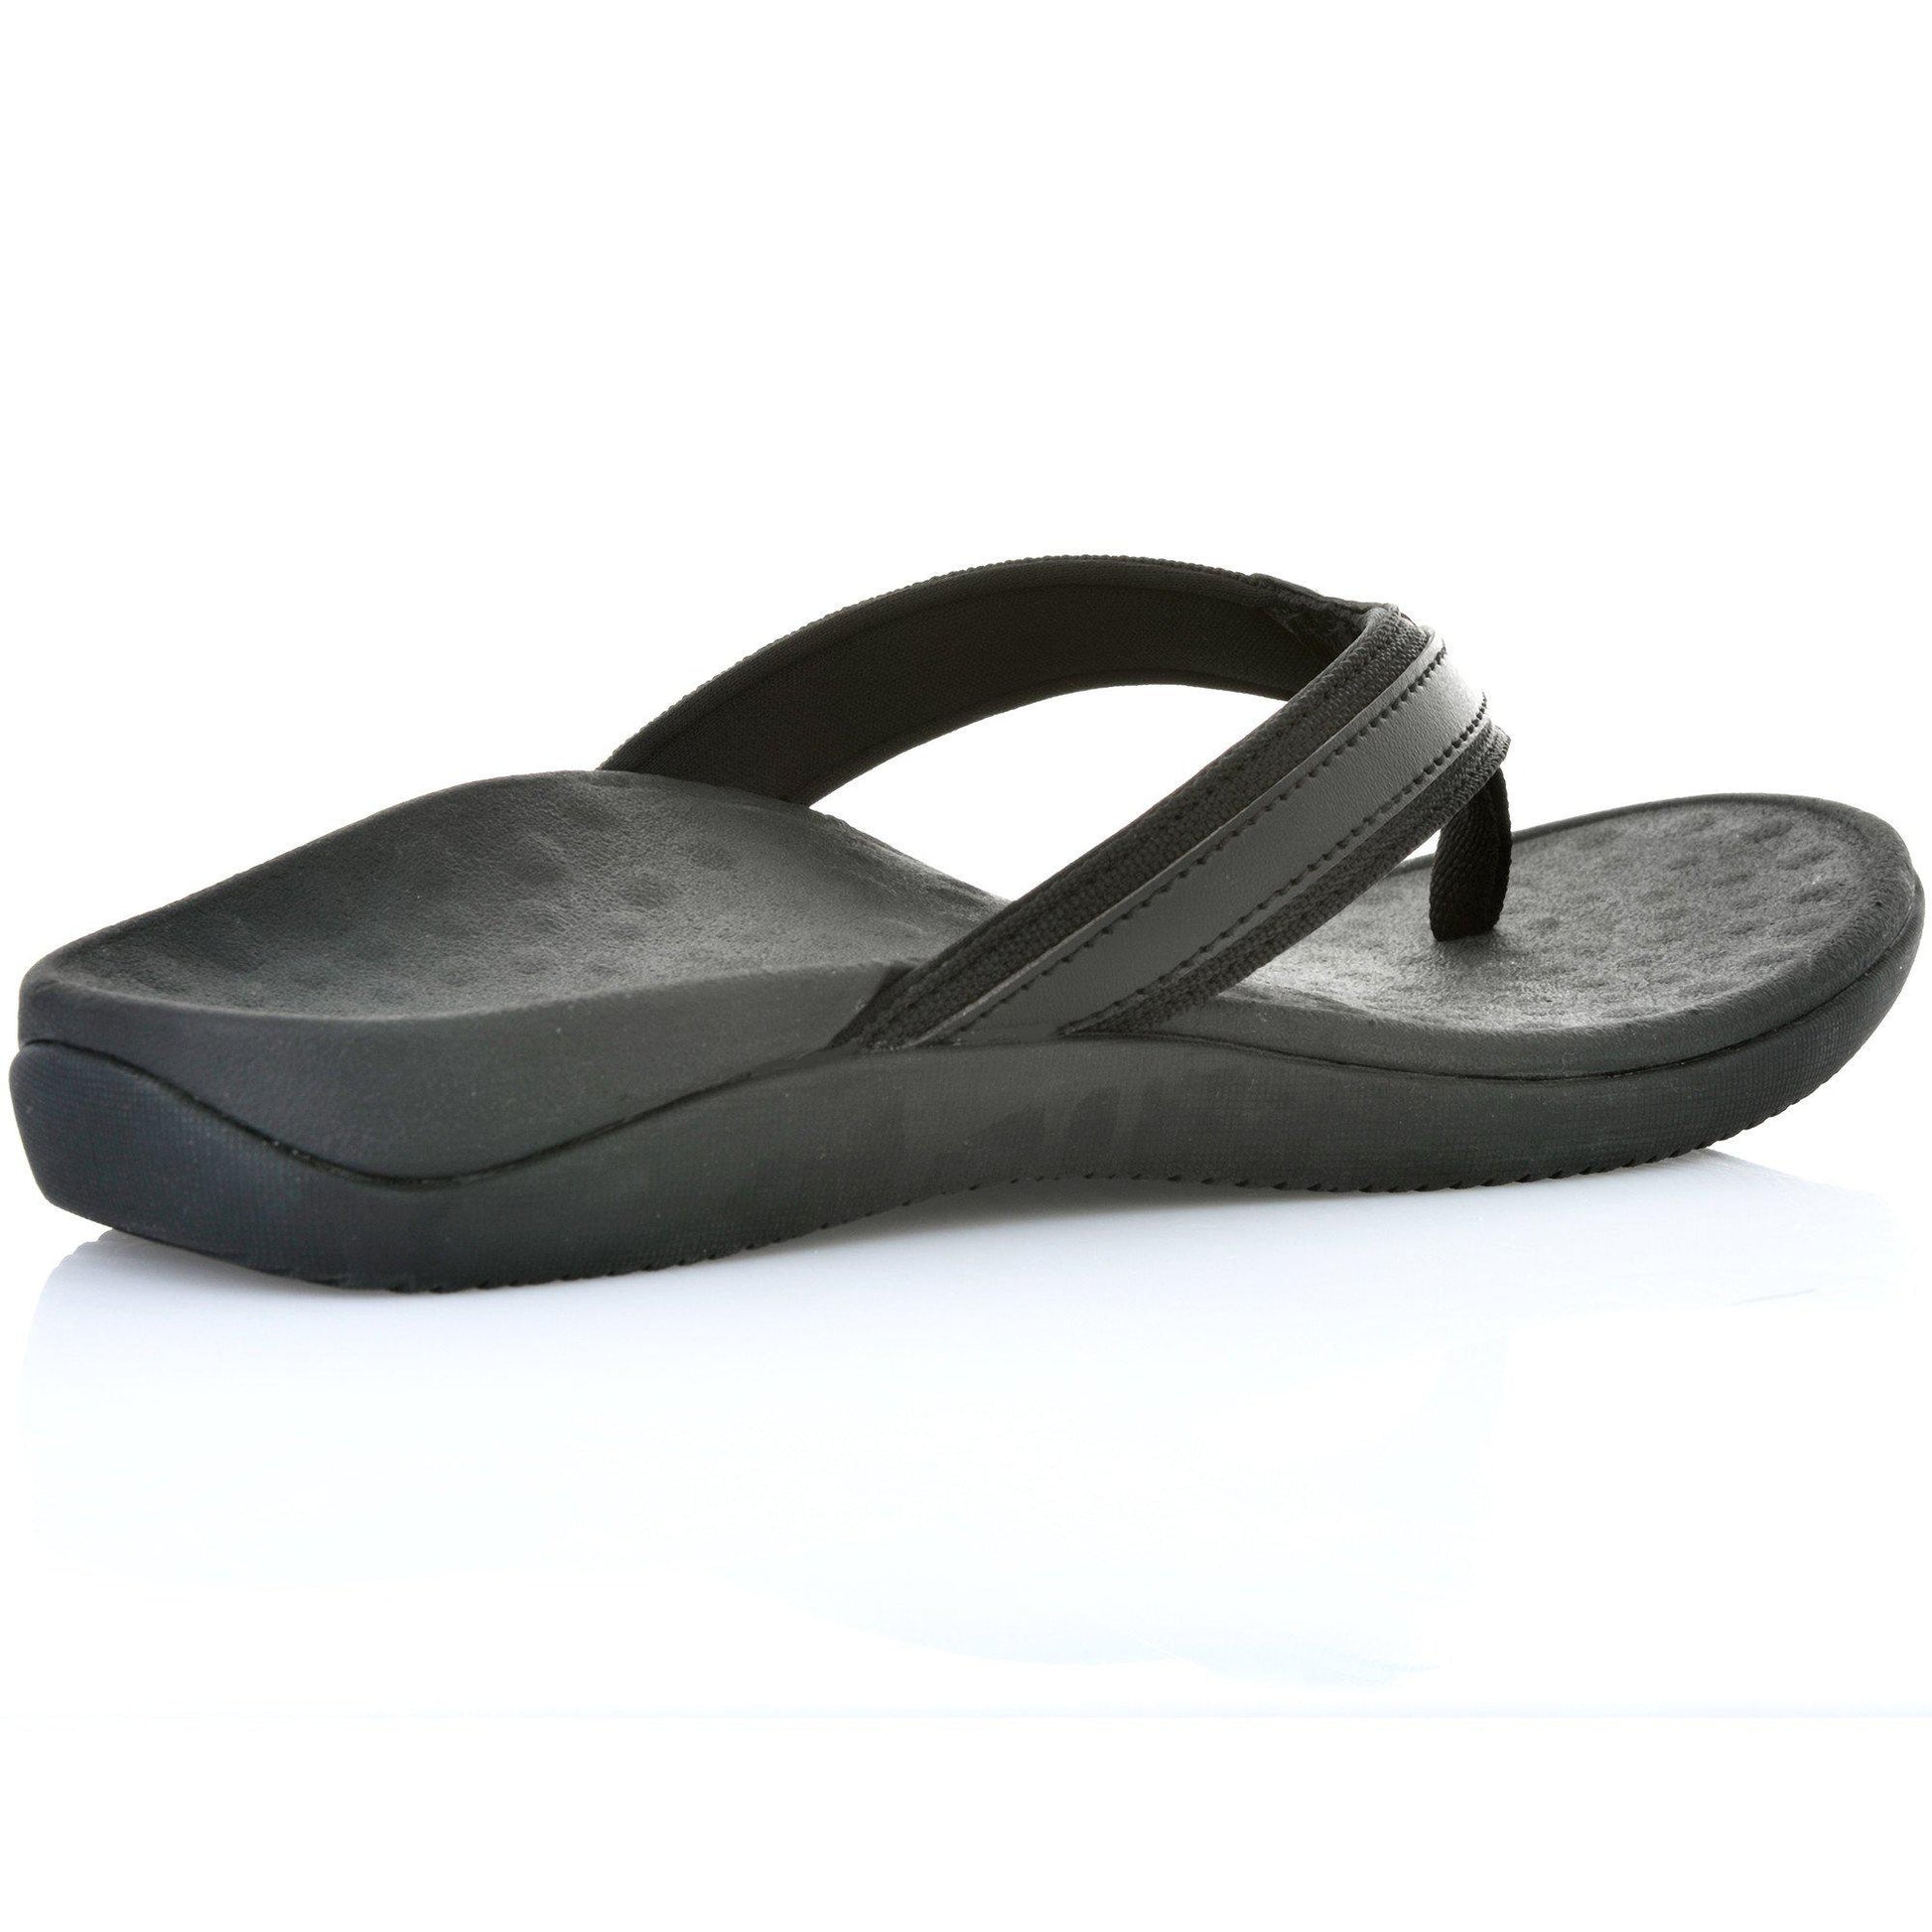  Arch Support Flip-Flops for Men and Women - black - diag out